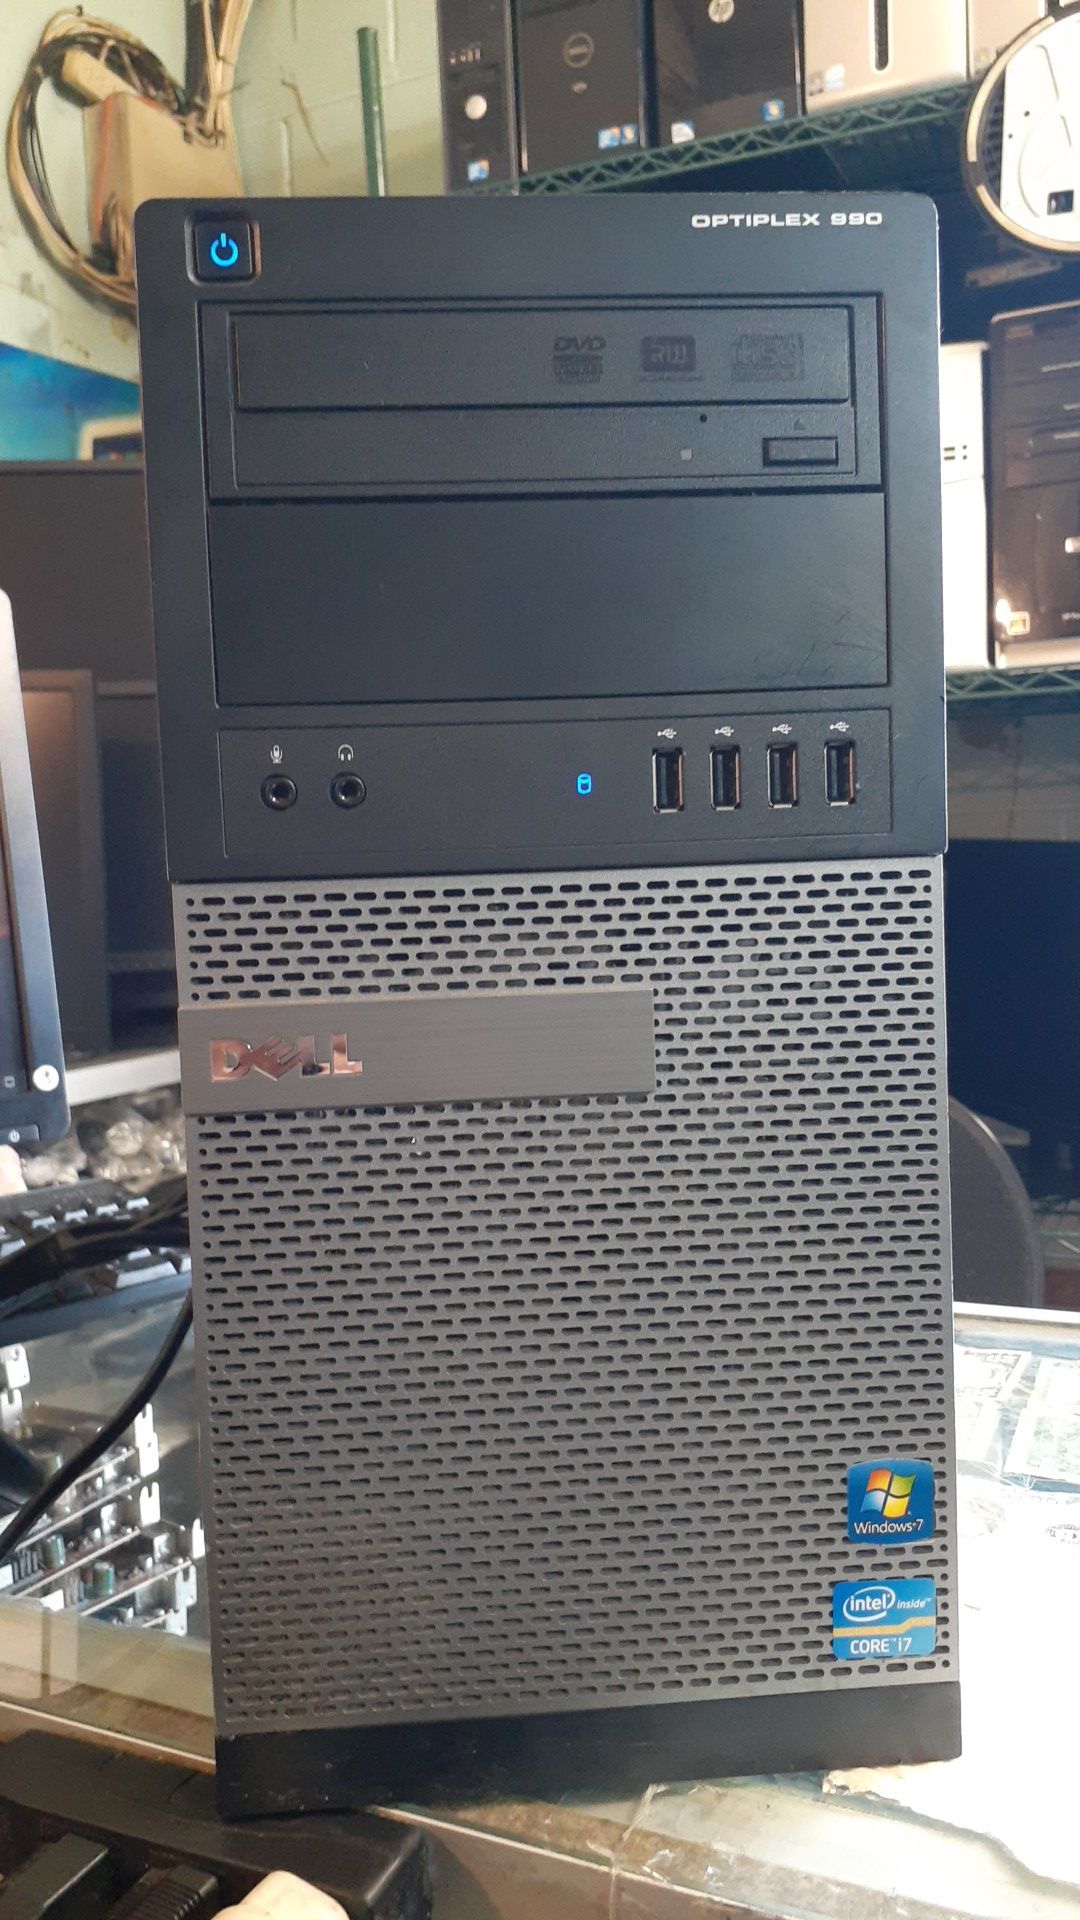 Dell optiplex 990 PC Intel core i7-2600 3.40ghz 8gb win 10 Adobe reader antivirus software office 2016 and much more $140 firm